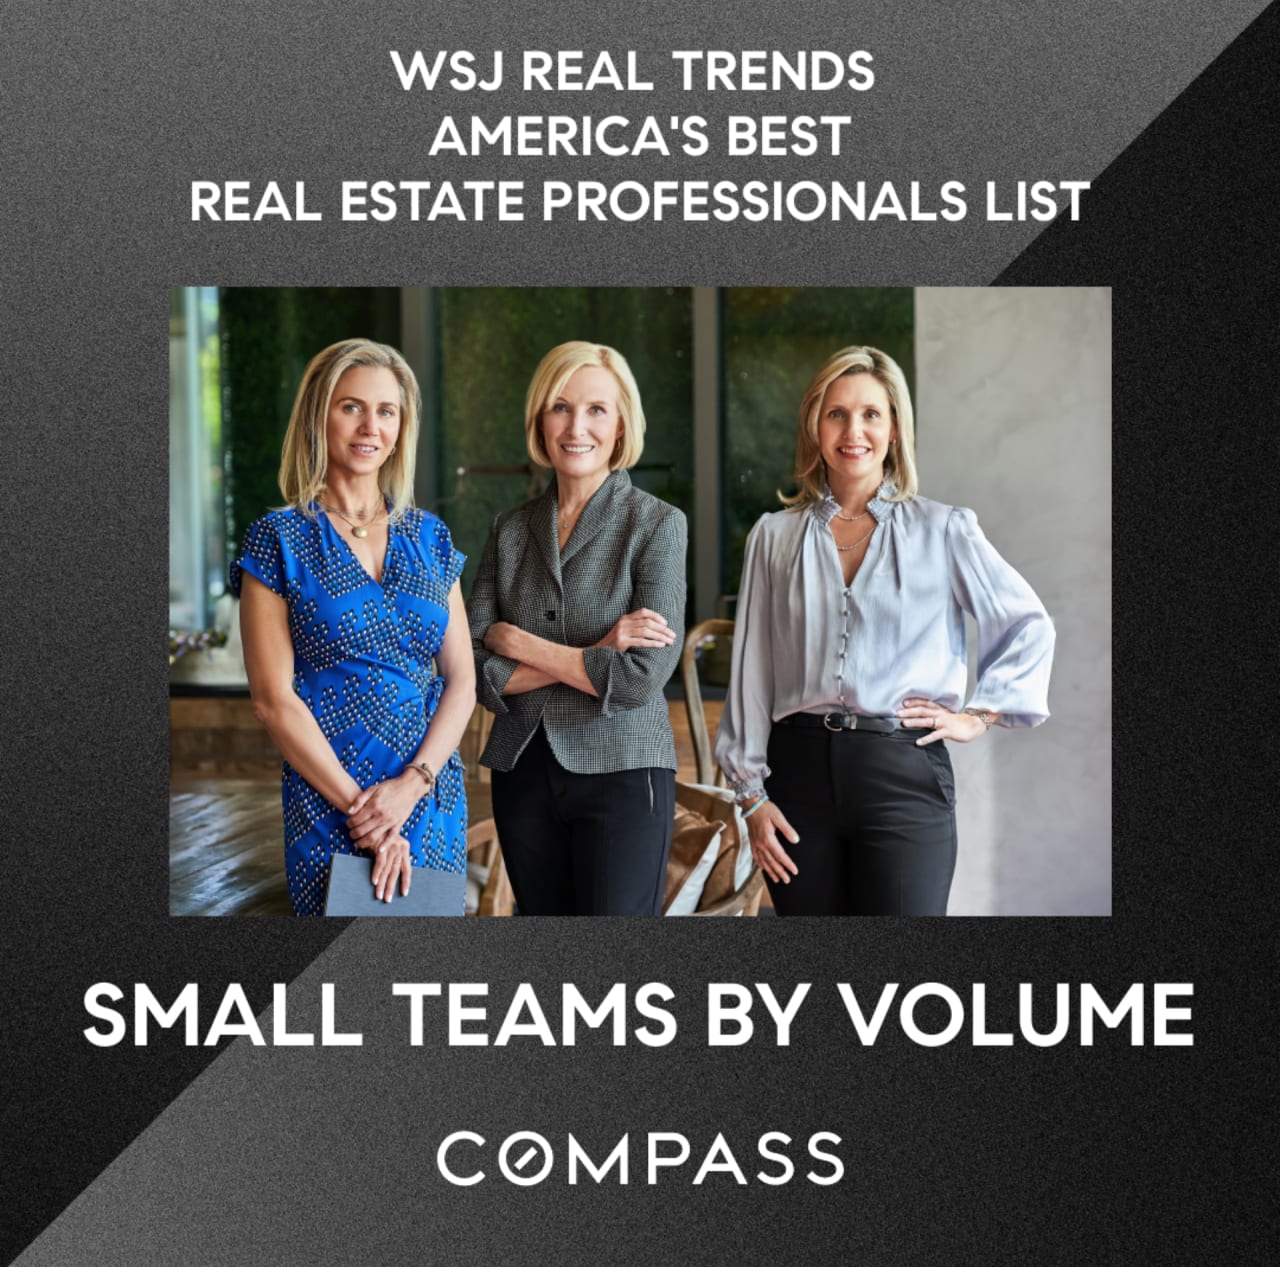 WSJ Real Trends America's Best Real Estate Professionals List 2020